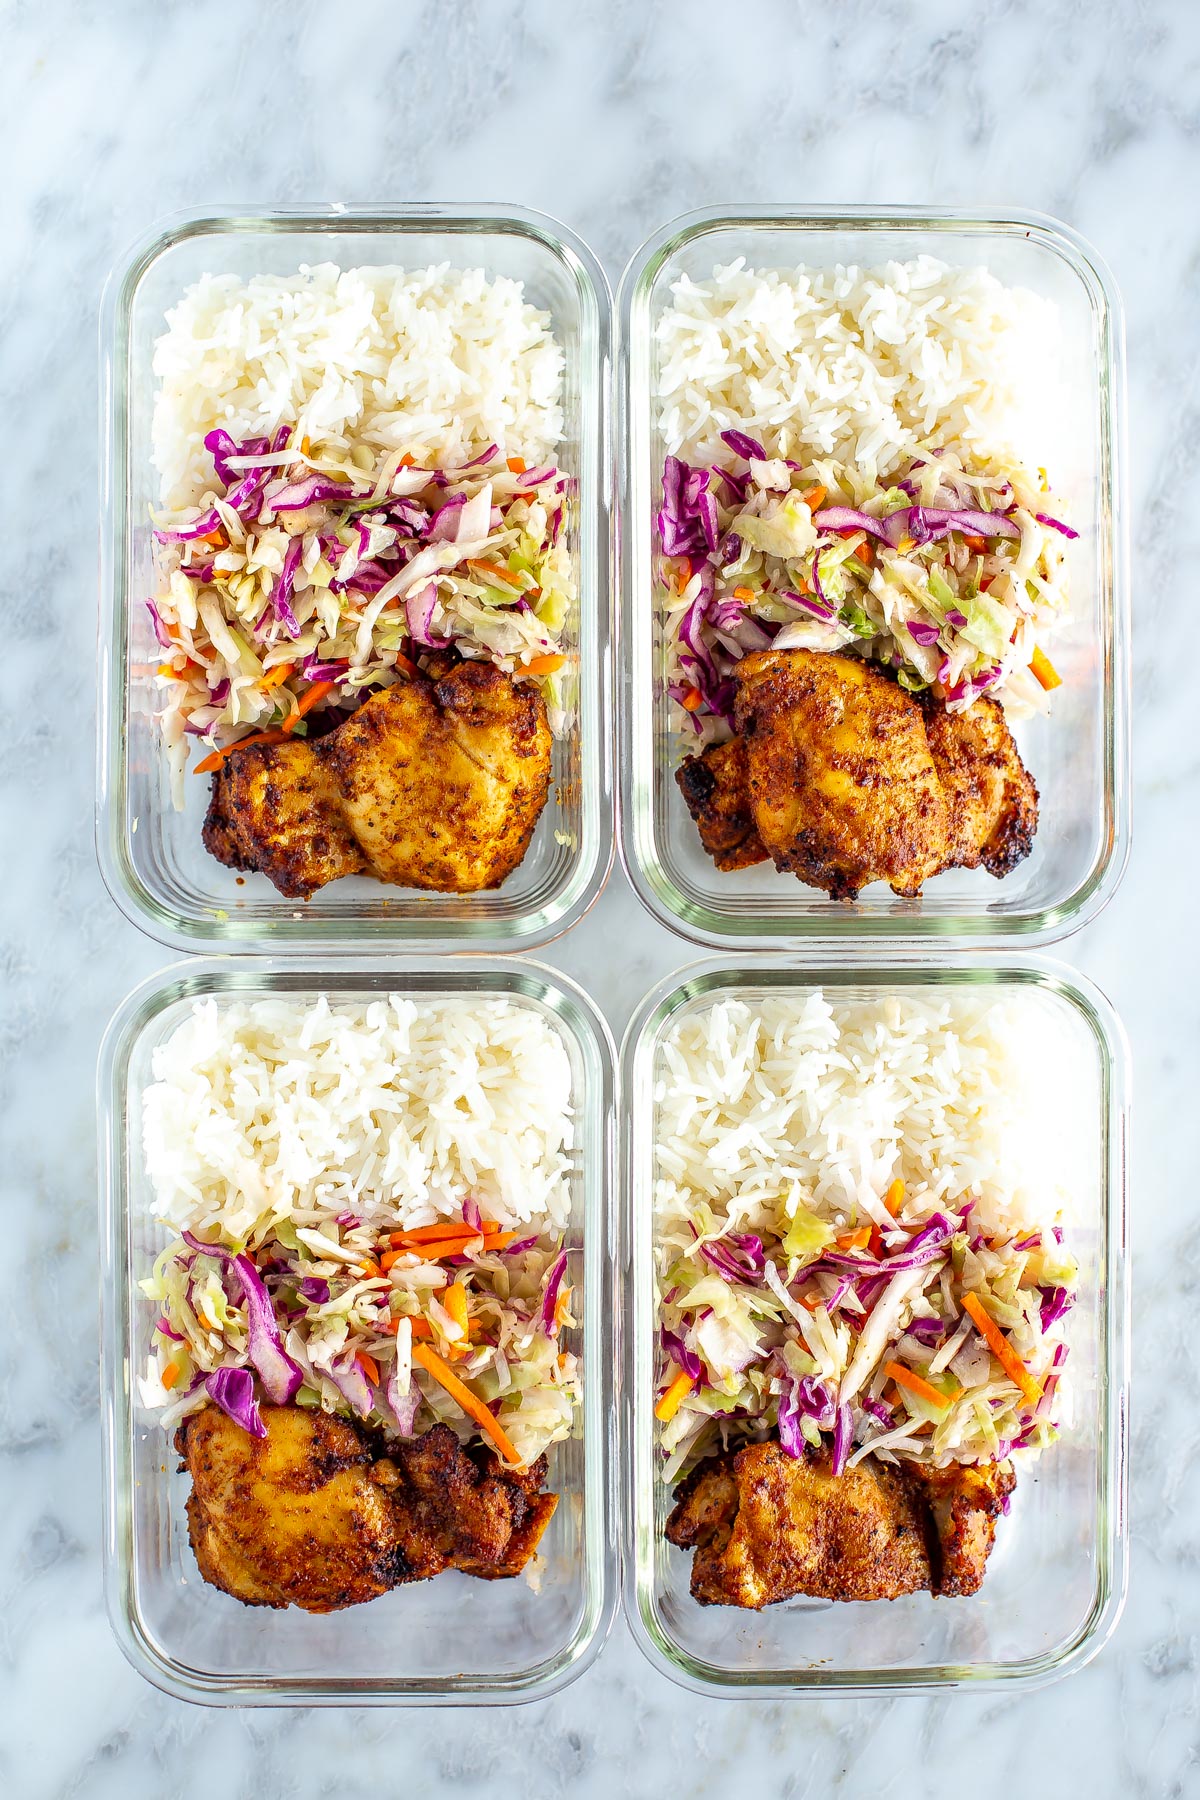 Chicken thighs with coleslaw and rice in meal prep bowls